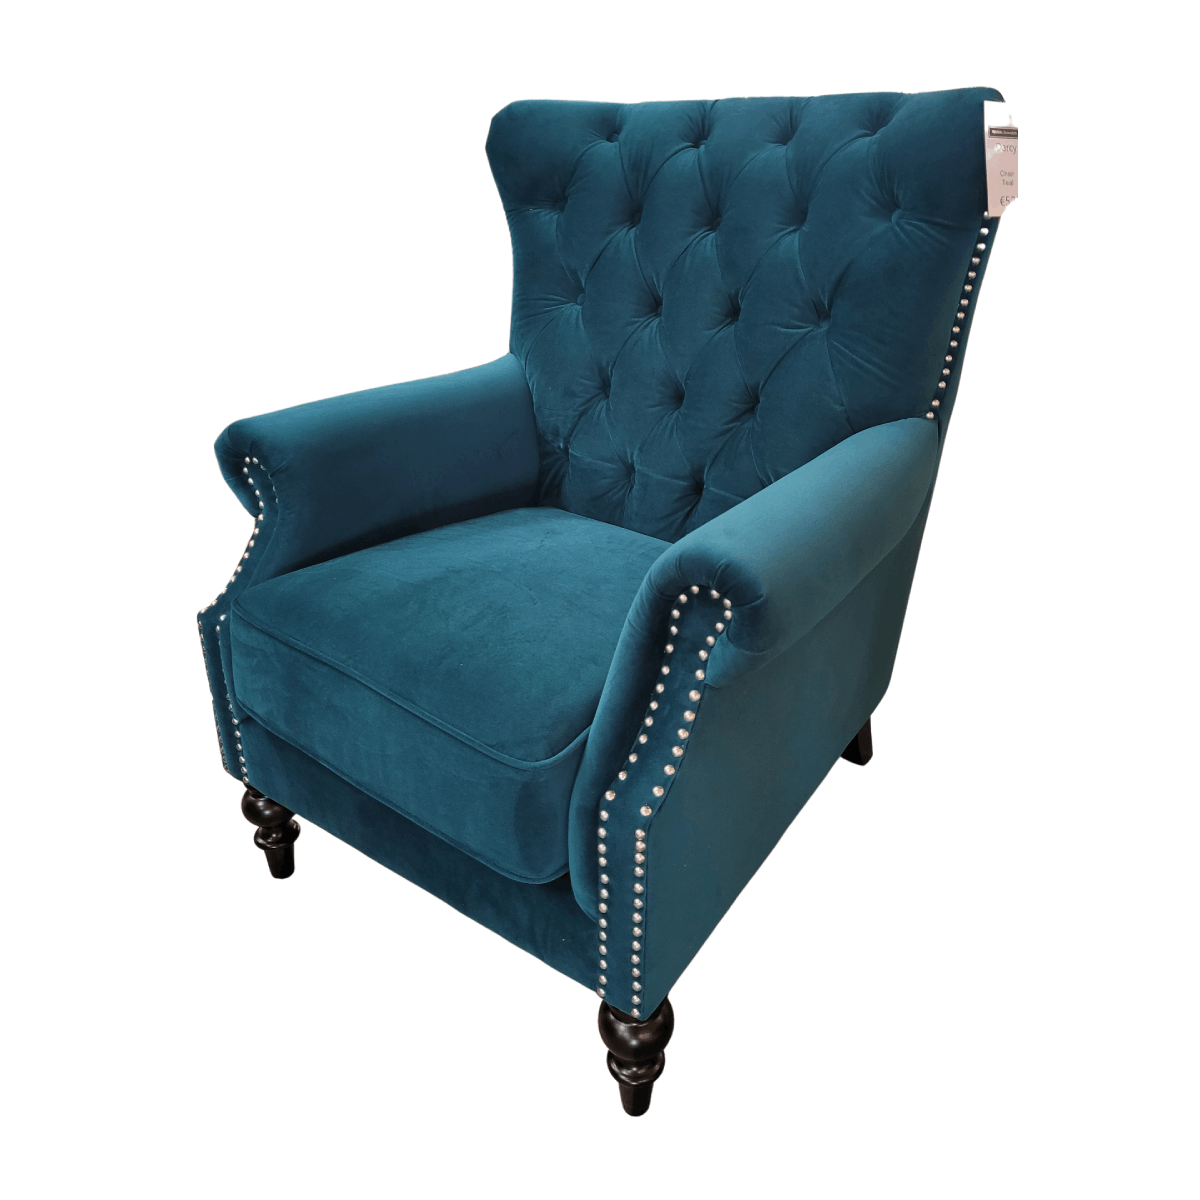 Darcy Chair Teal